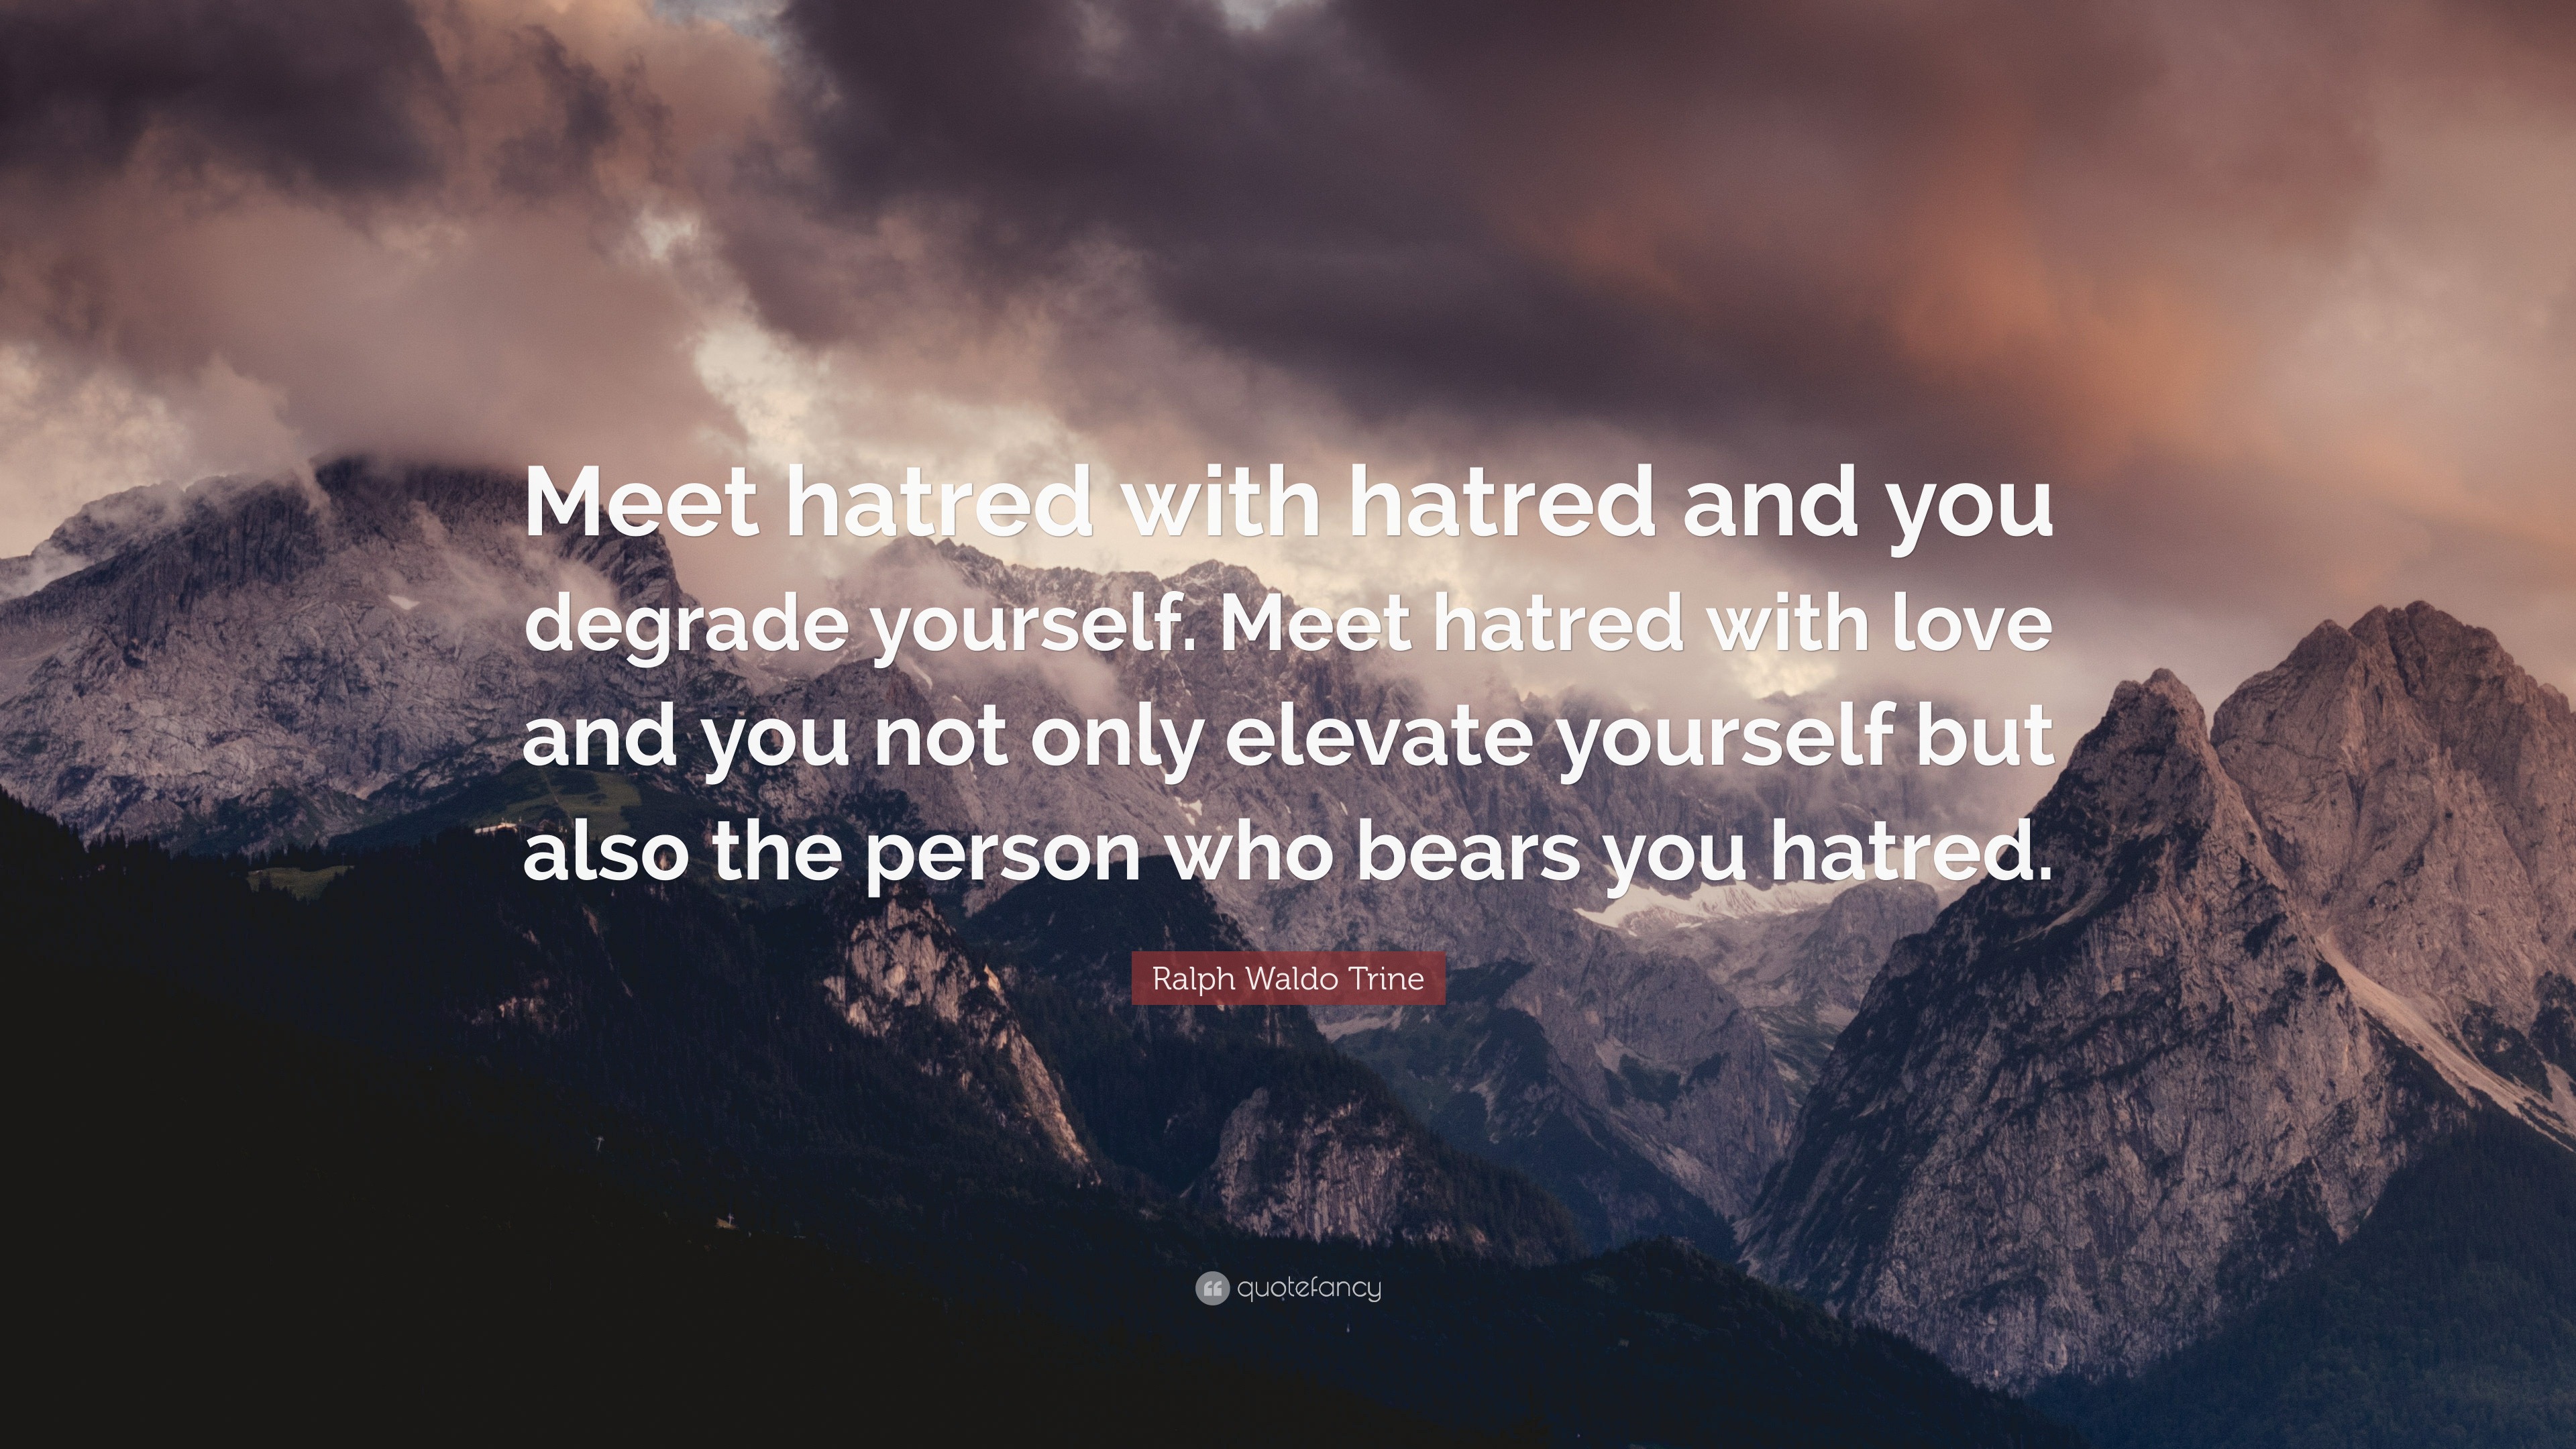 Ralph Waldo Trine Quote: “Meet hatred with hatred and you degrade ...